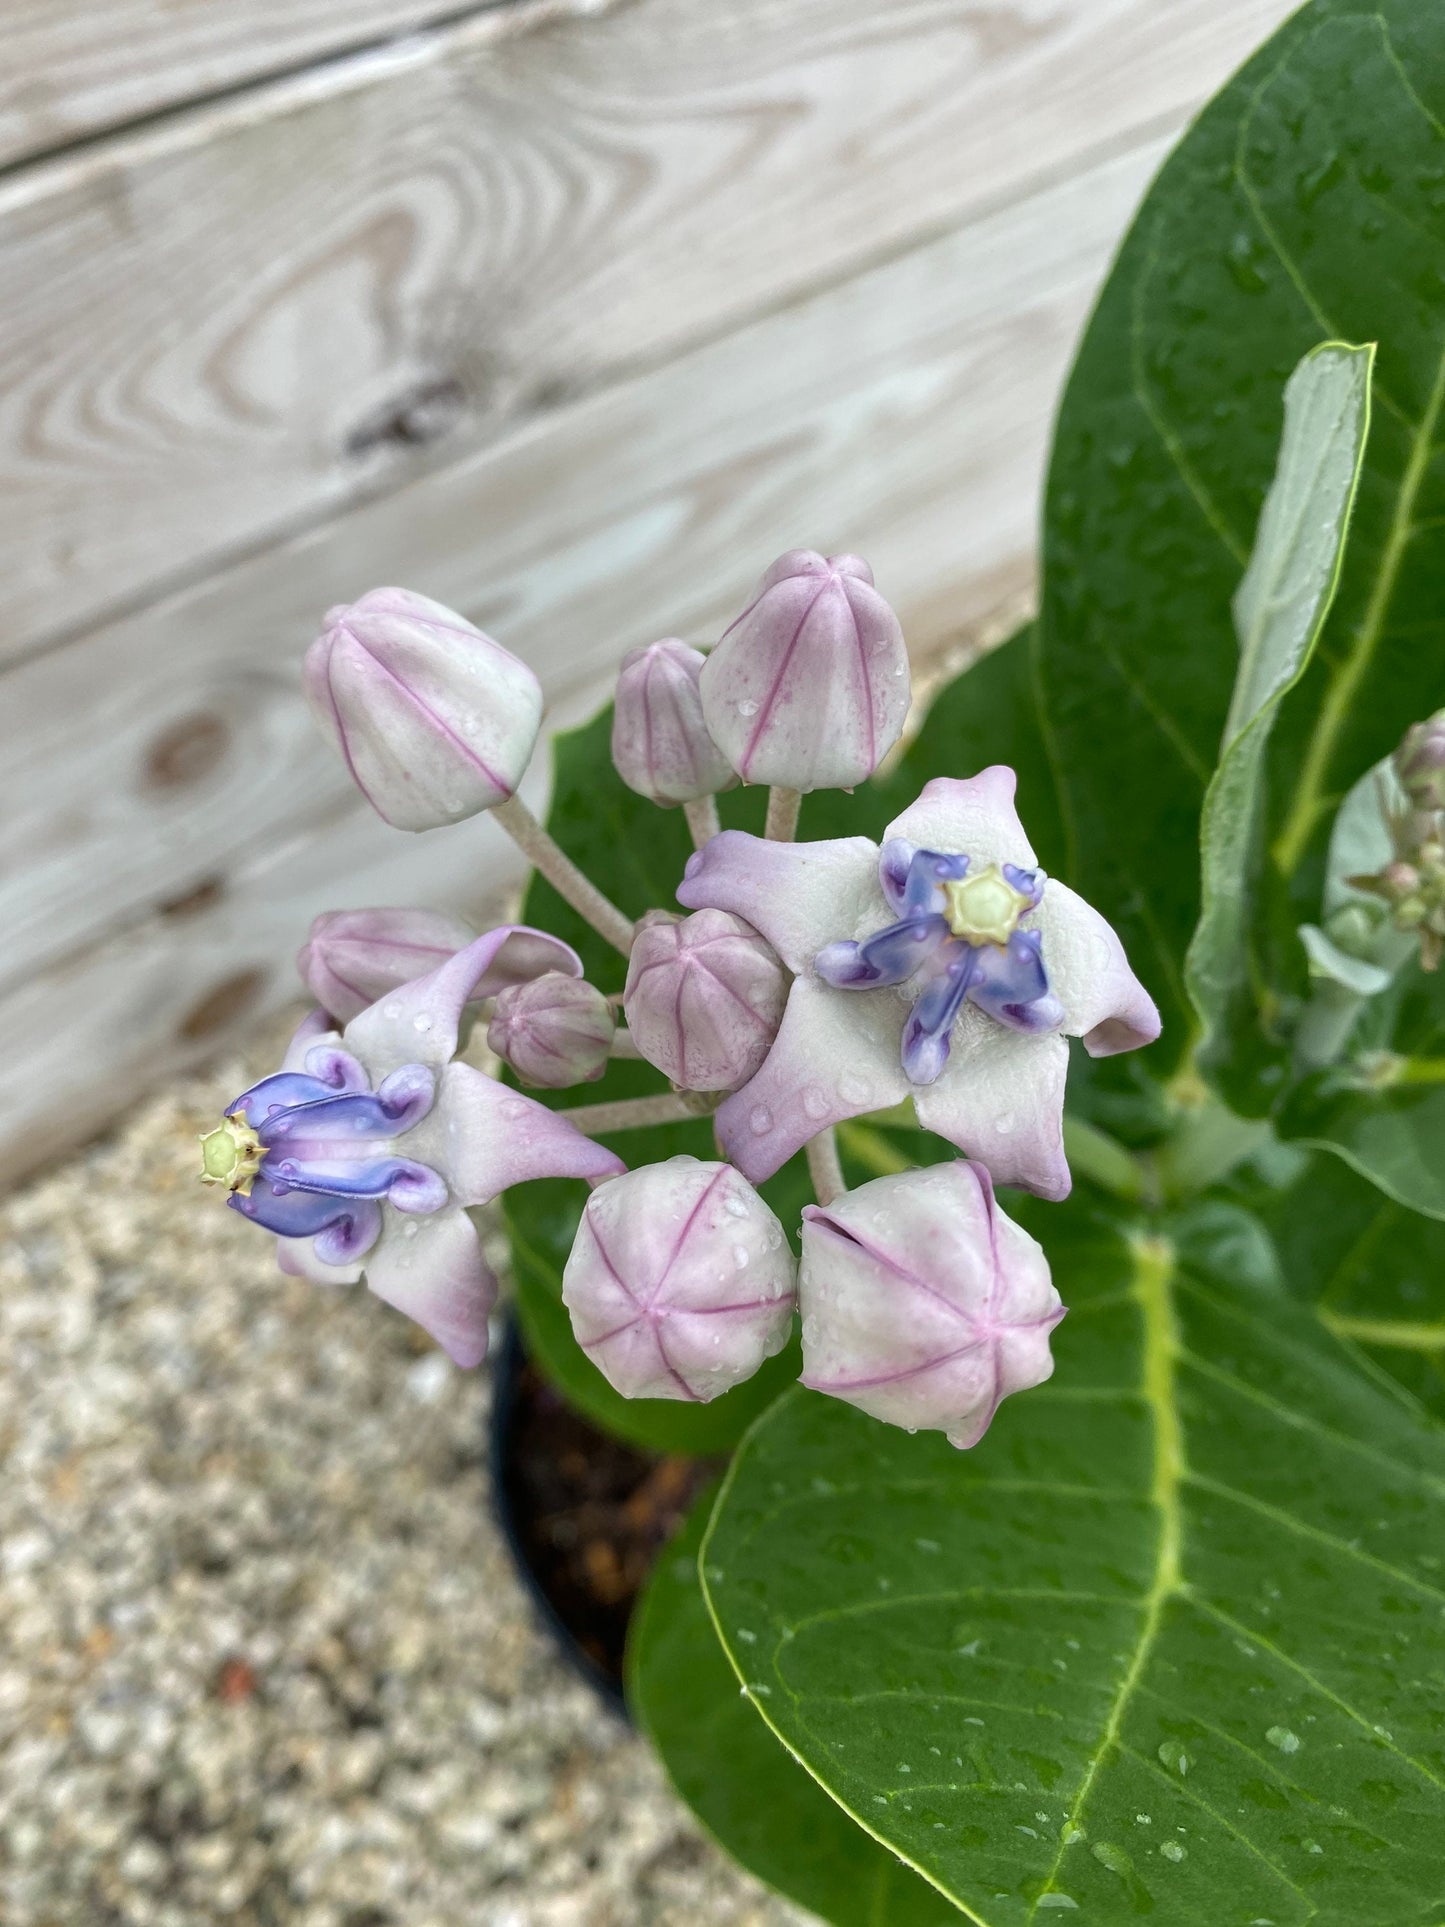 Giant Milkweed Calotropis gigantea 14” inch pot  FREE Shipping East Coast and Central States